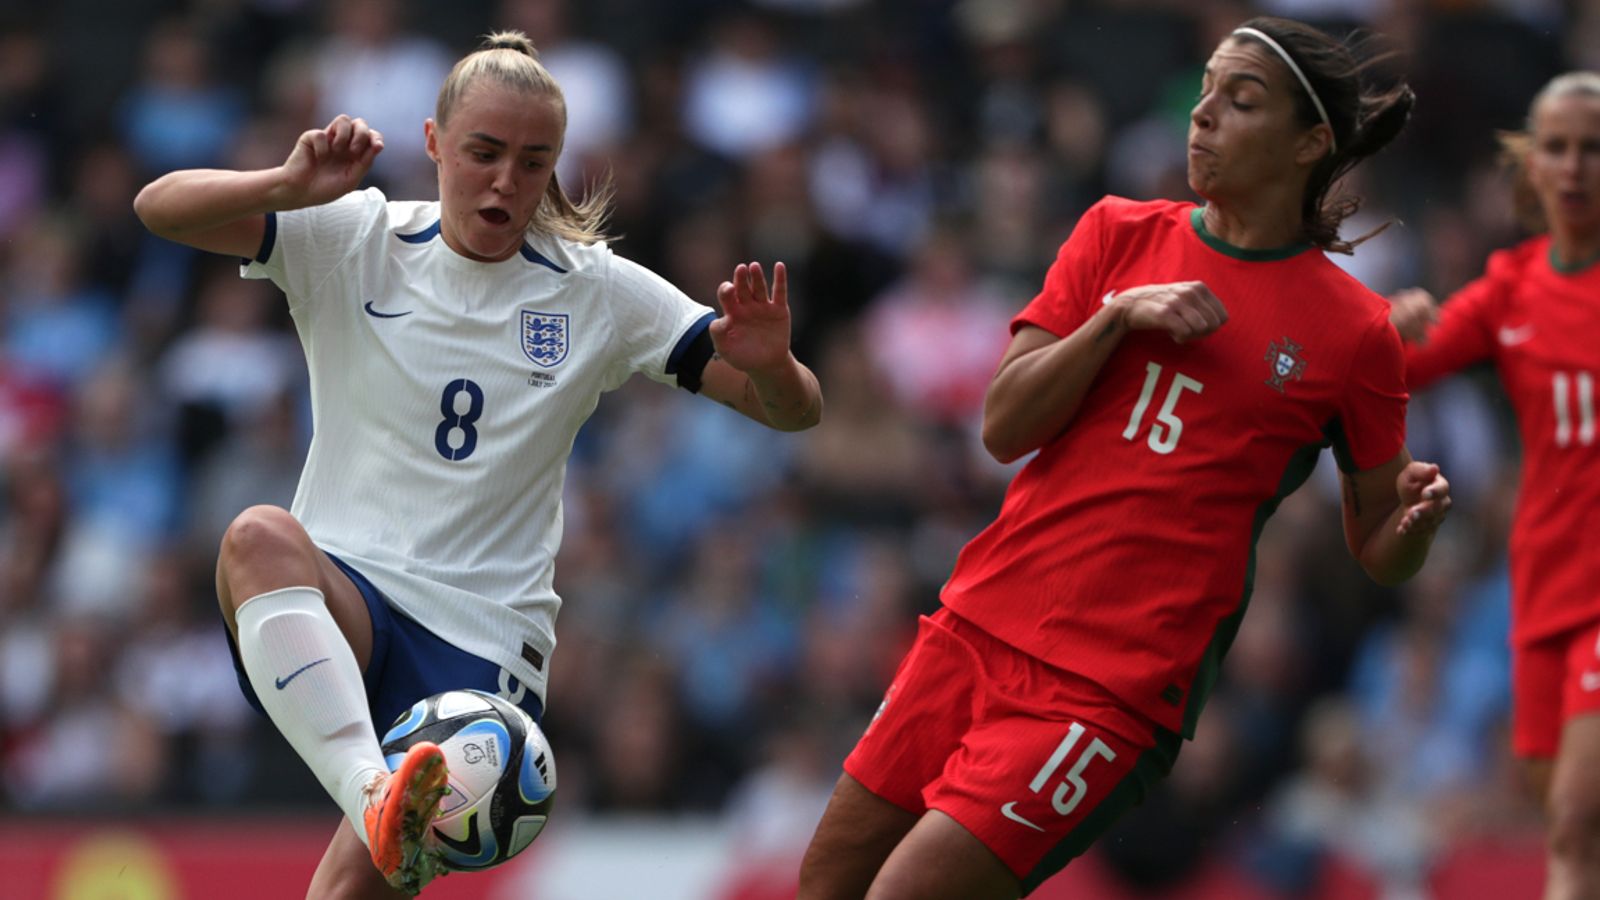 England 0-0 Portugal: Georgia Stanway and Lucy Bronze hit the woodwork but Lionesses hold on in World Cup warm-up